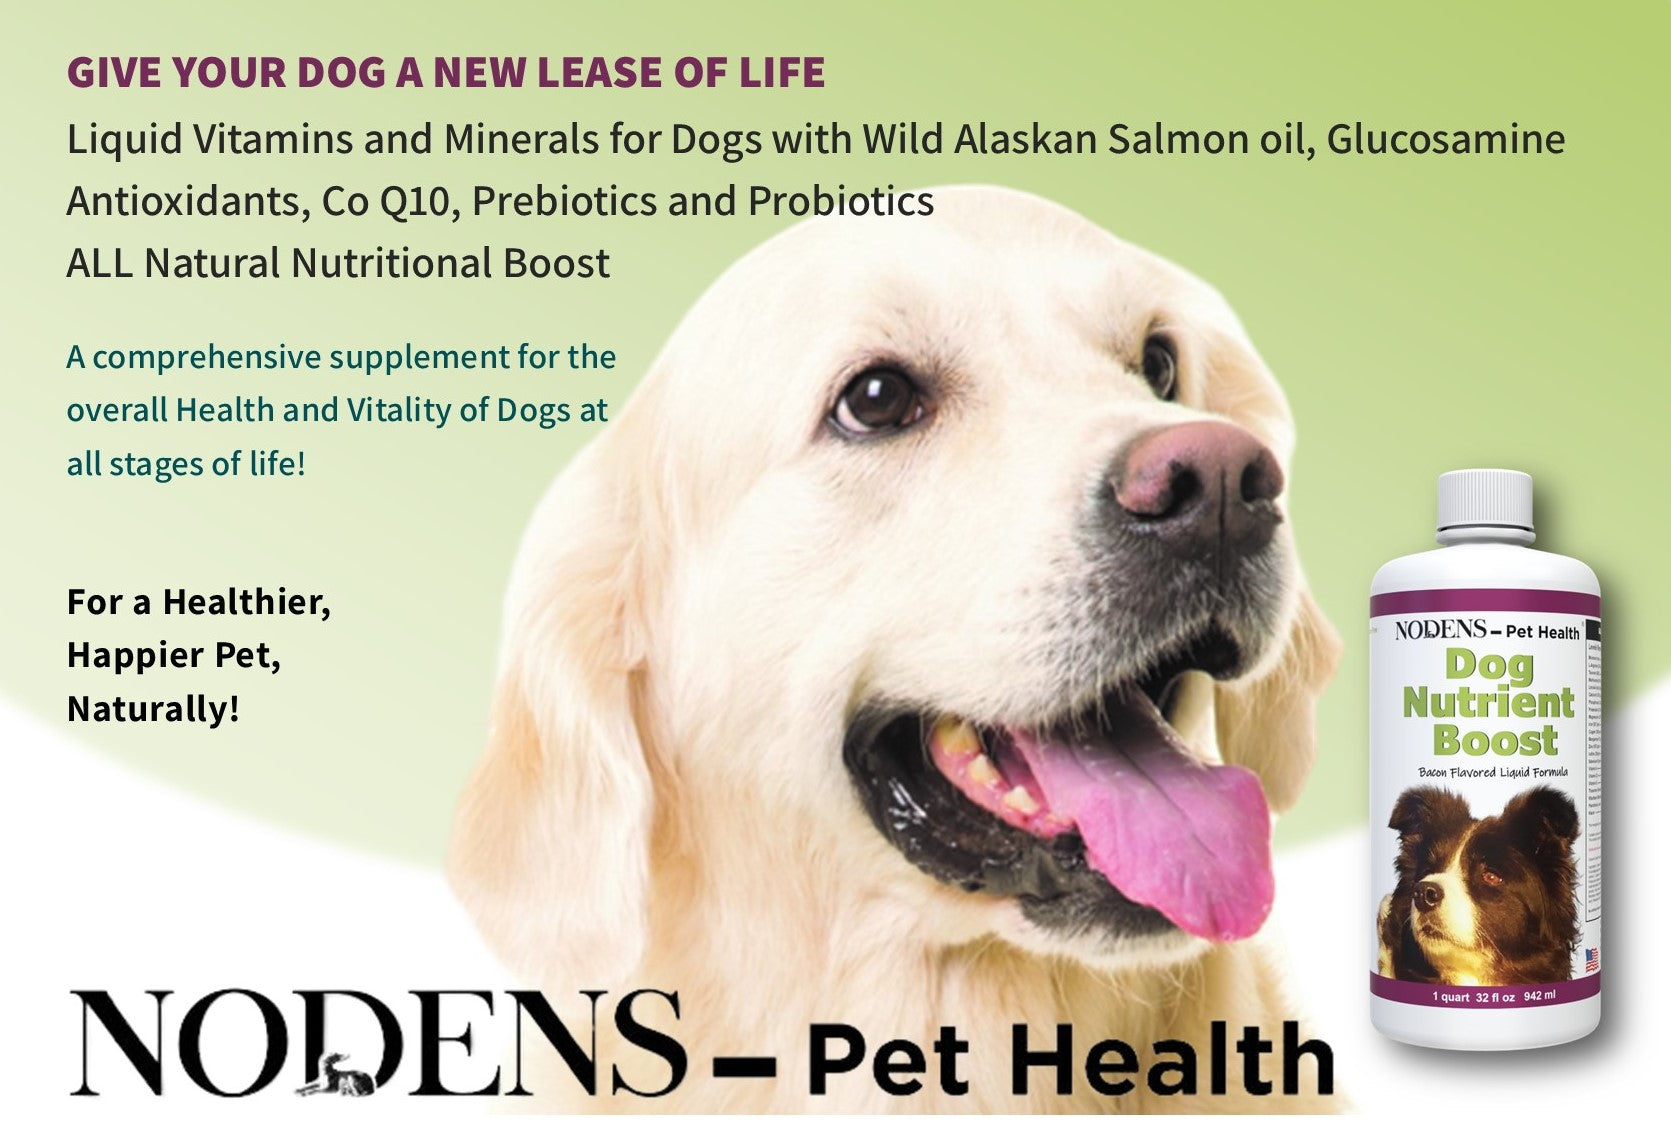 Nodens Nutrient Boost Multivitamin for Dogs - Liquid Health Supplement - Prebiotic and Probiotic for Digestion and Gut Health – Immune Support